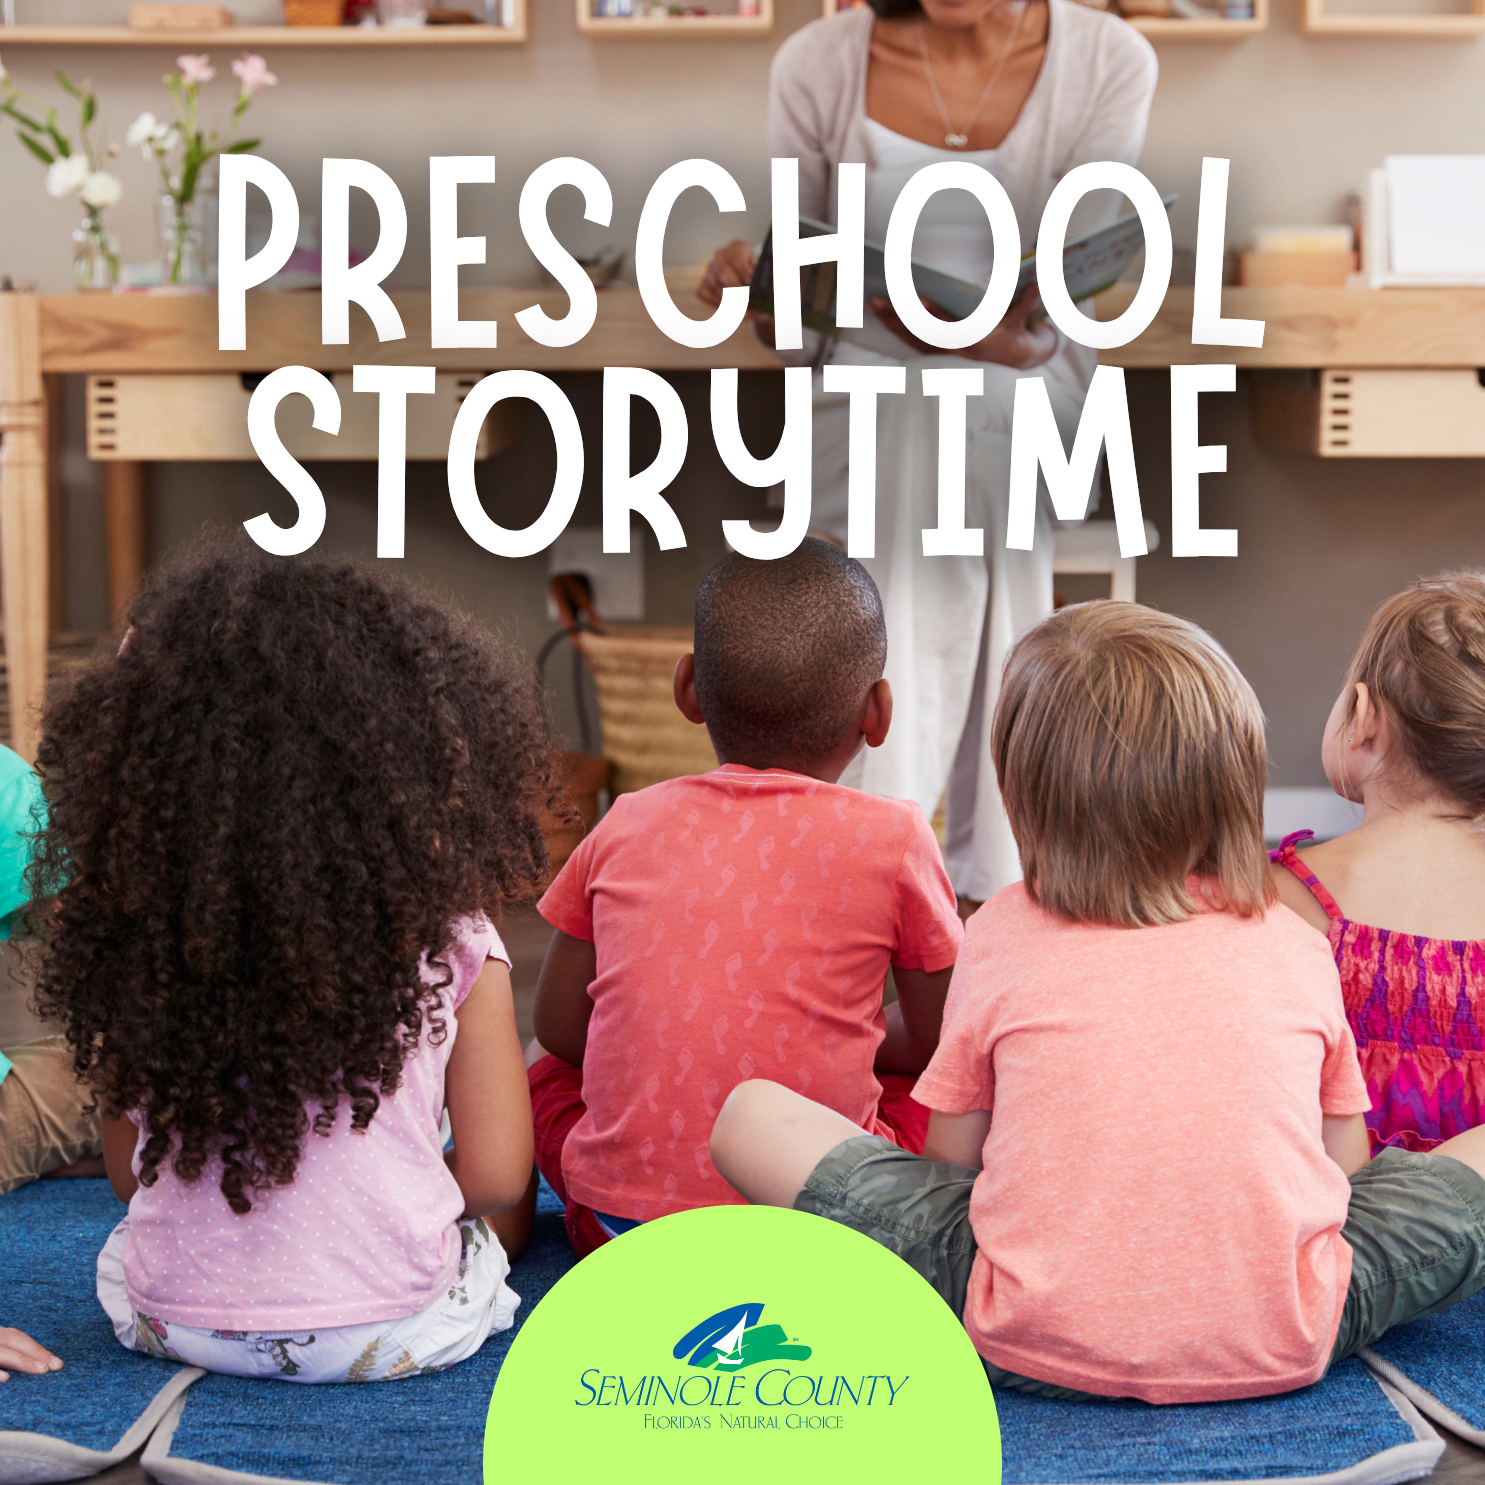 Preschool Storytime for kids ages 3-5 years